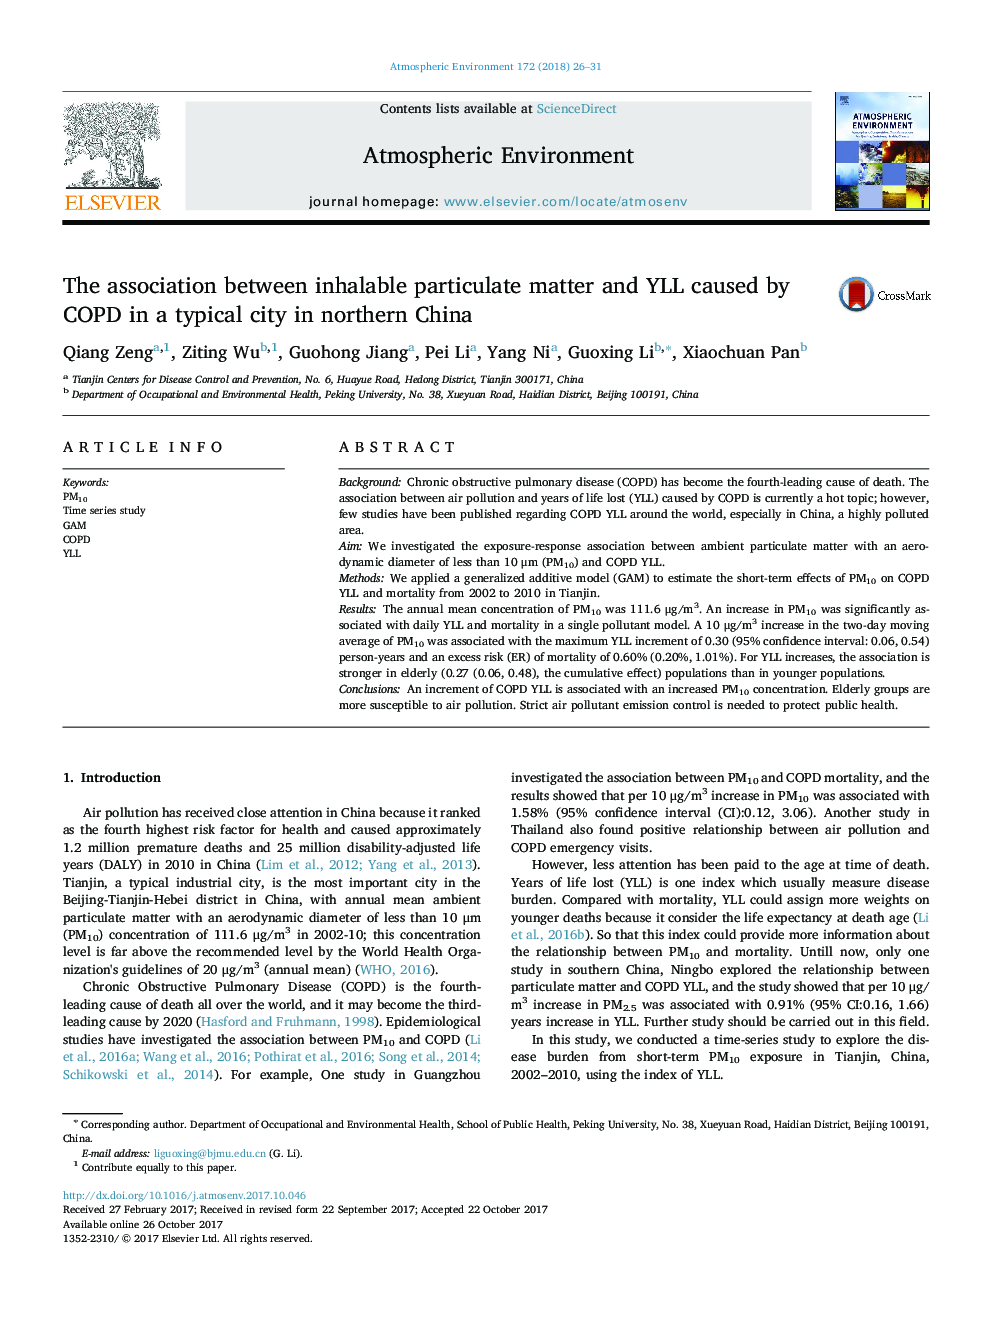 The association between inhalable particulate matter and YLL caused by COPD in a typical city in northern China